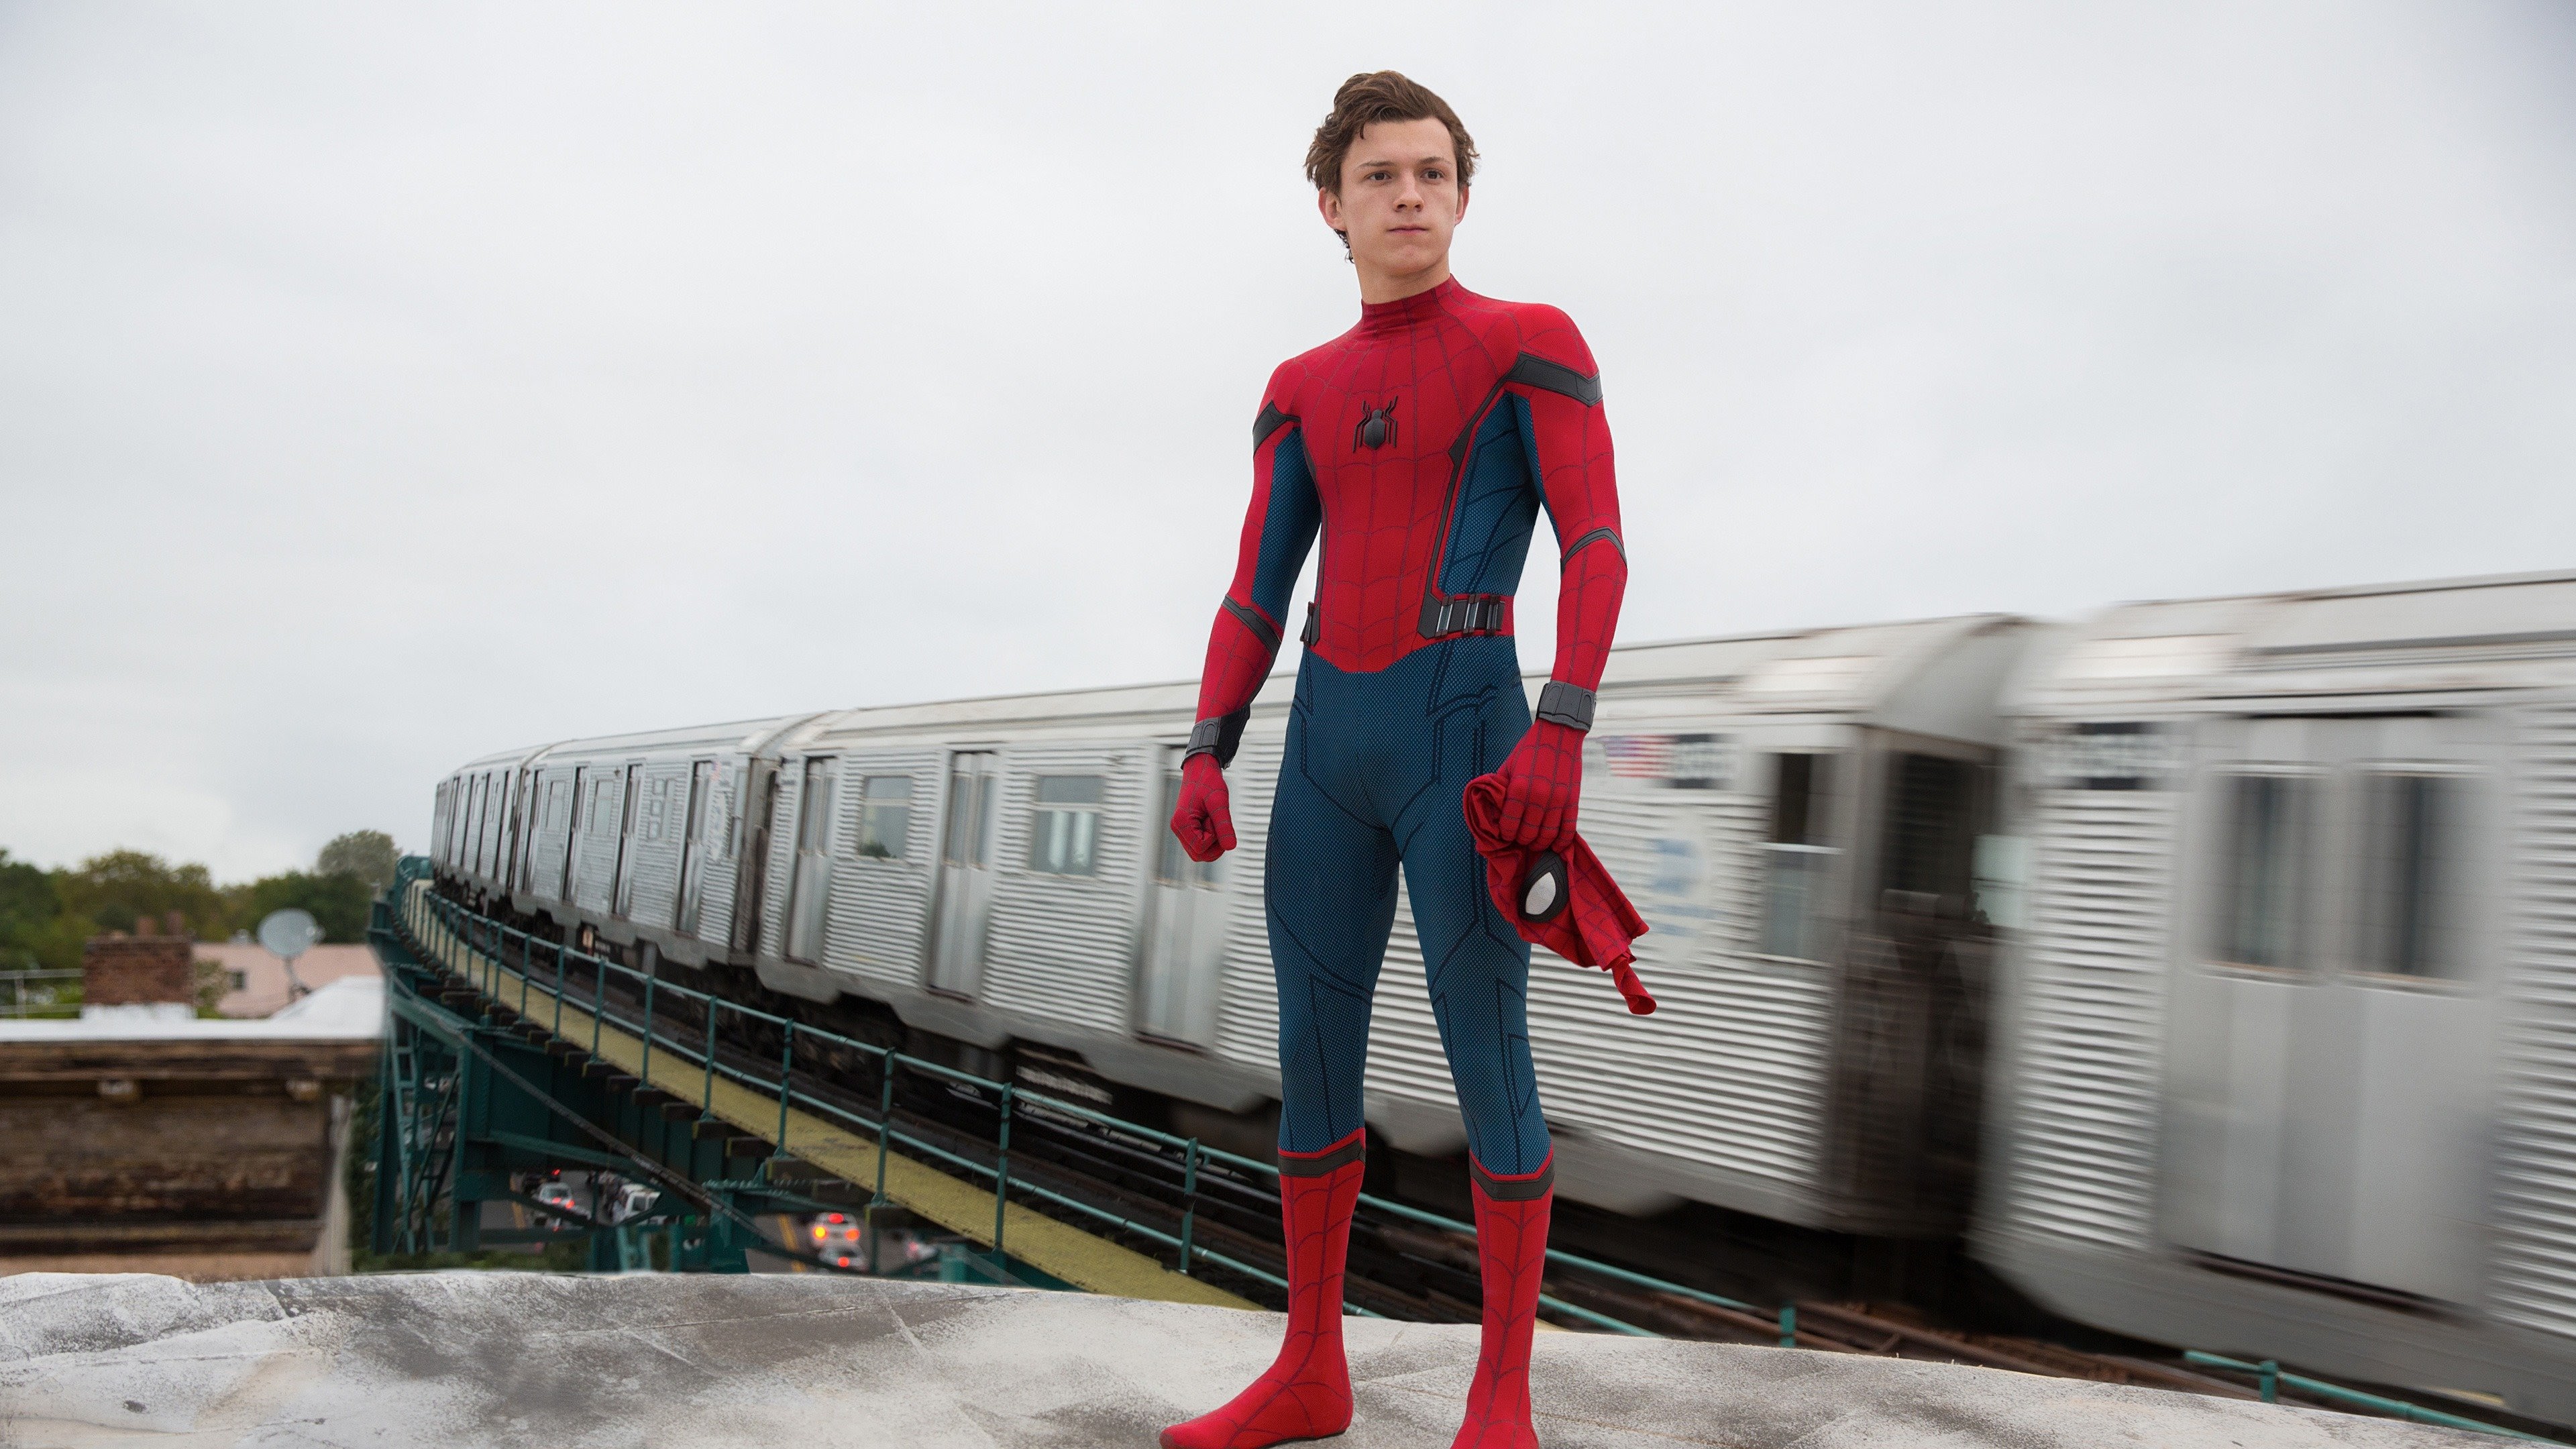 Spider-Man: Homecoming - Movies on Google Play